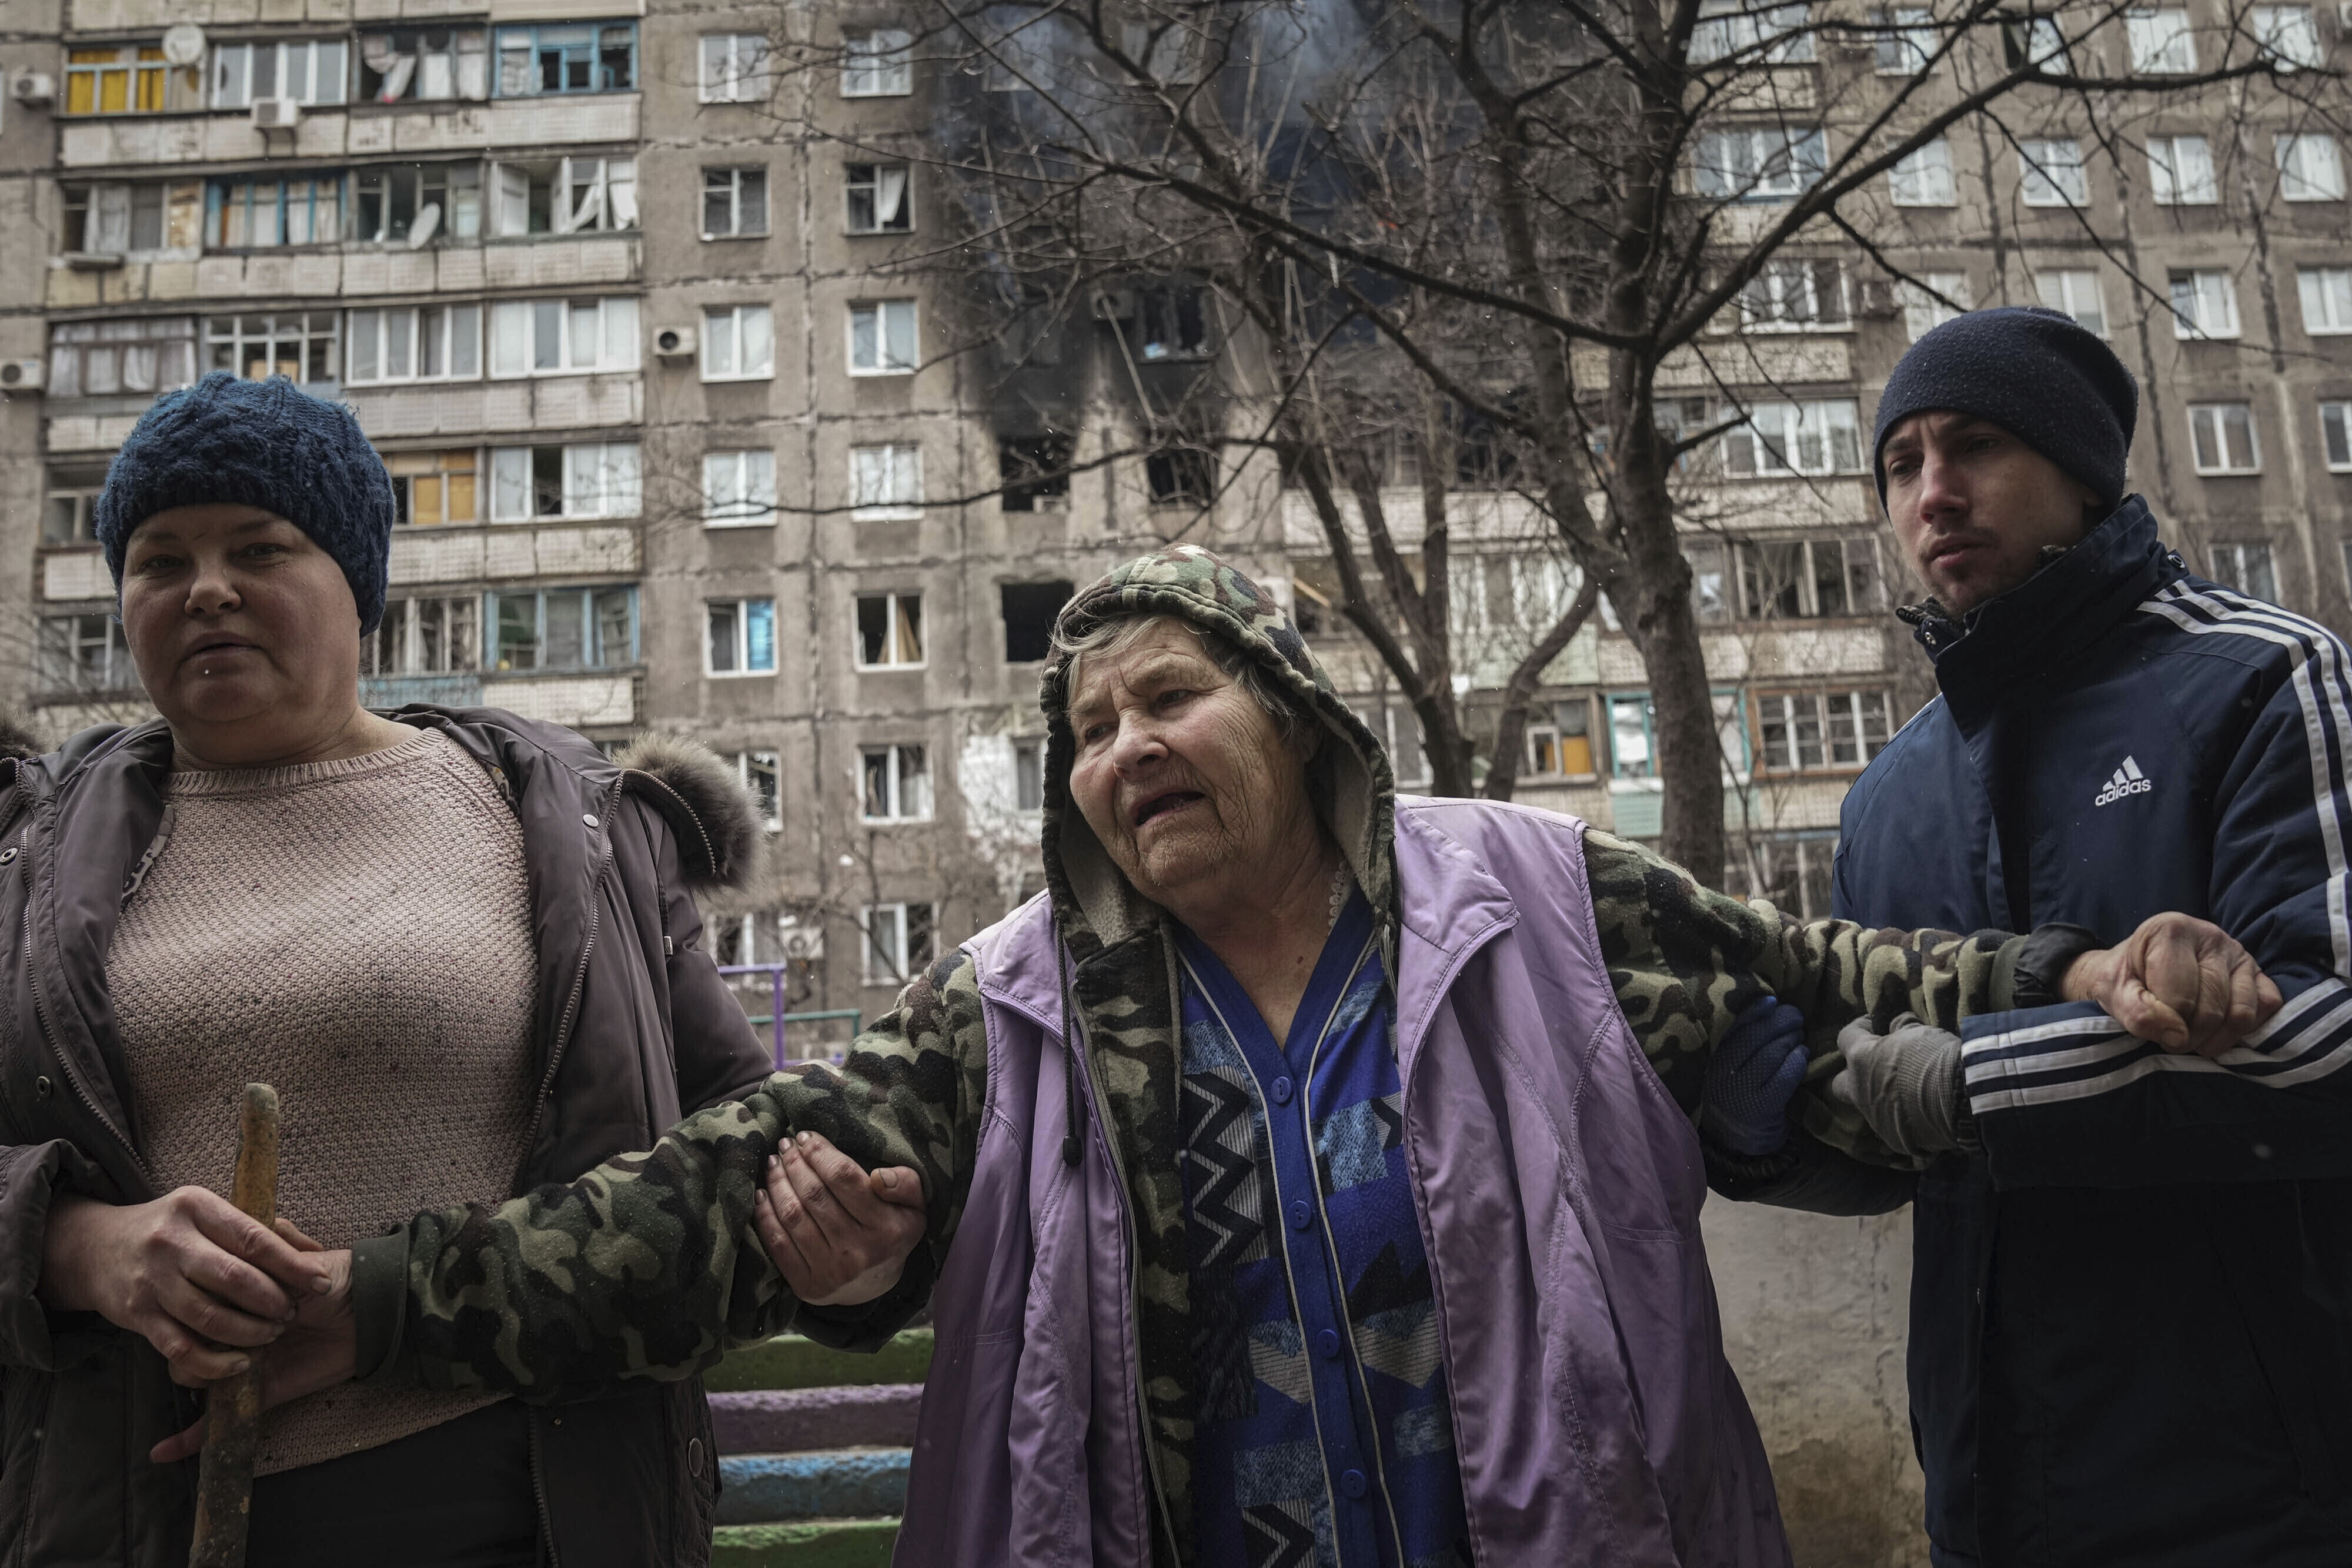 People help an elderly woman in the streets of Mariupol, Ukraine, on March 7.